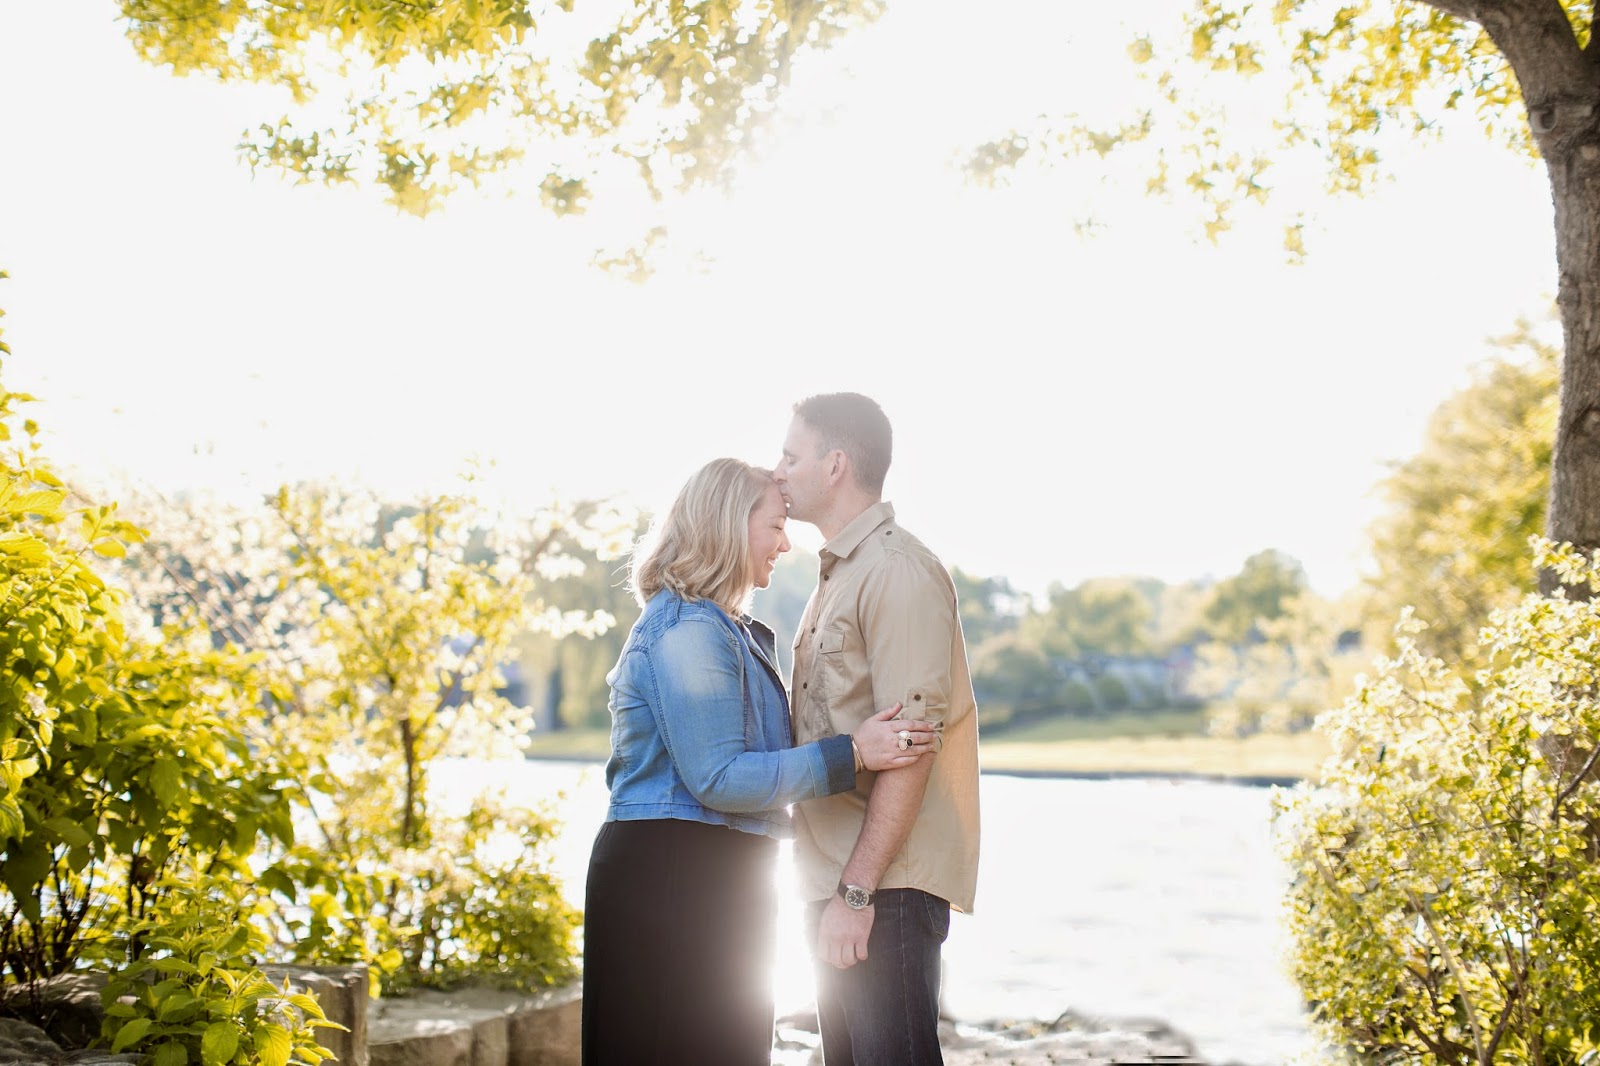 KATIE NICOLLE: Jackie & Greg's Engagement Session